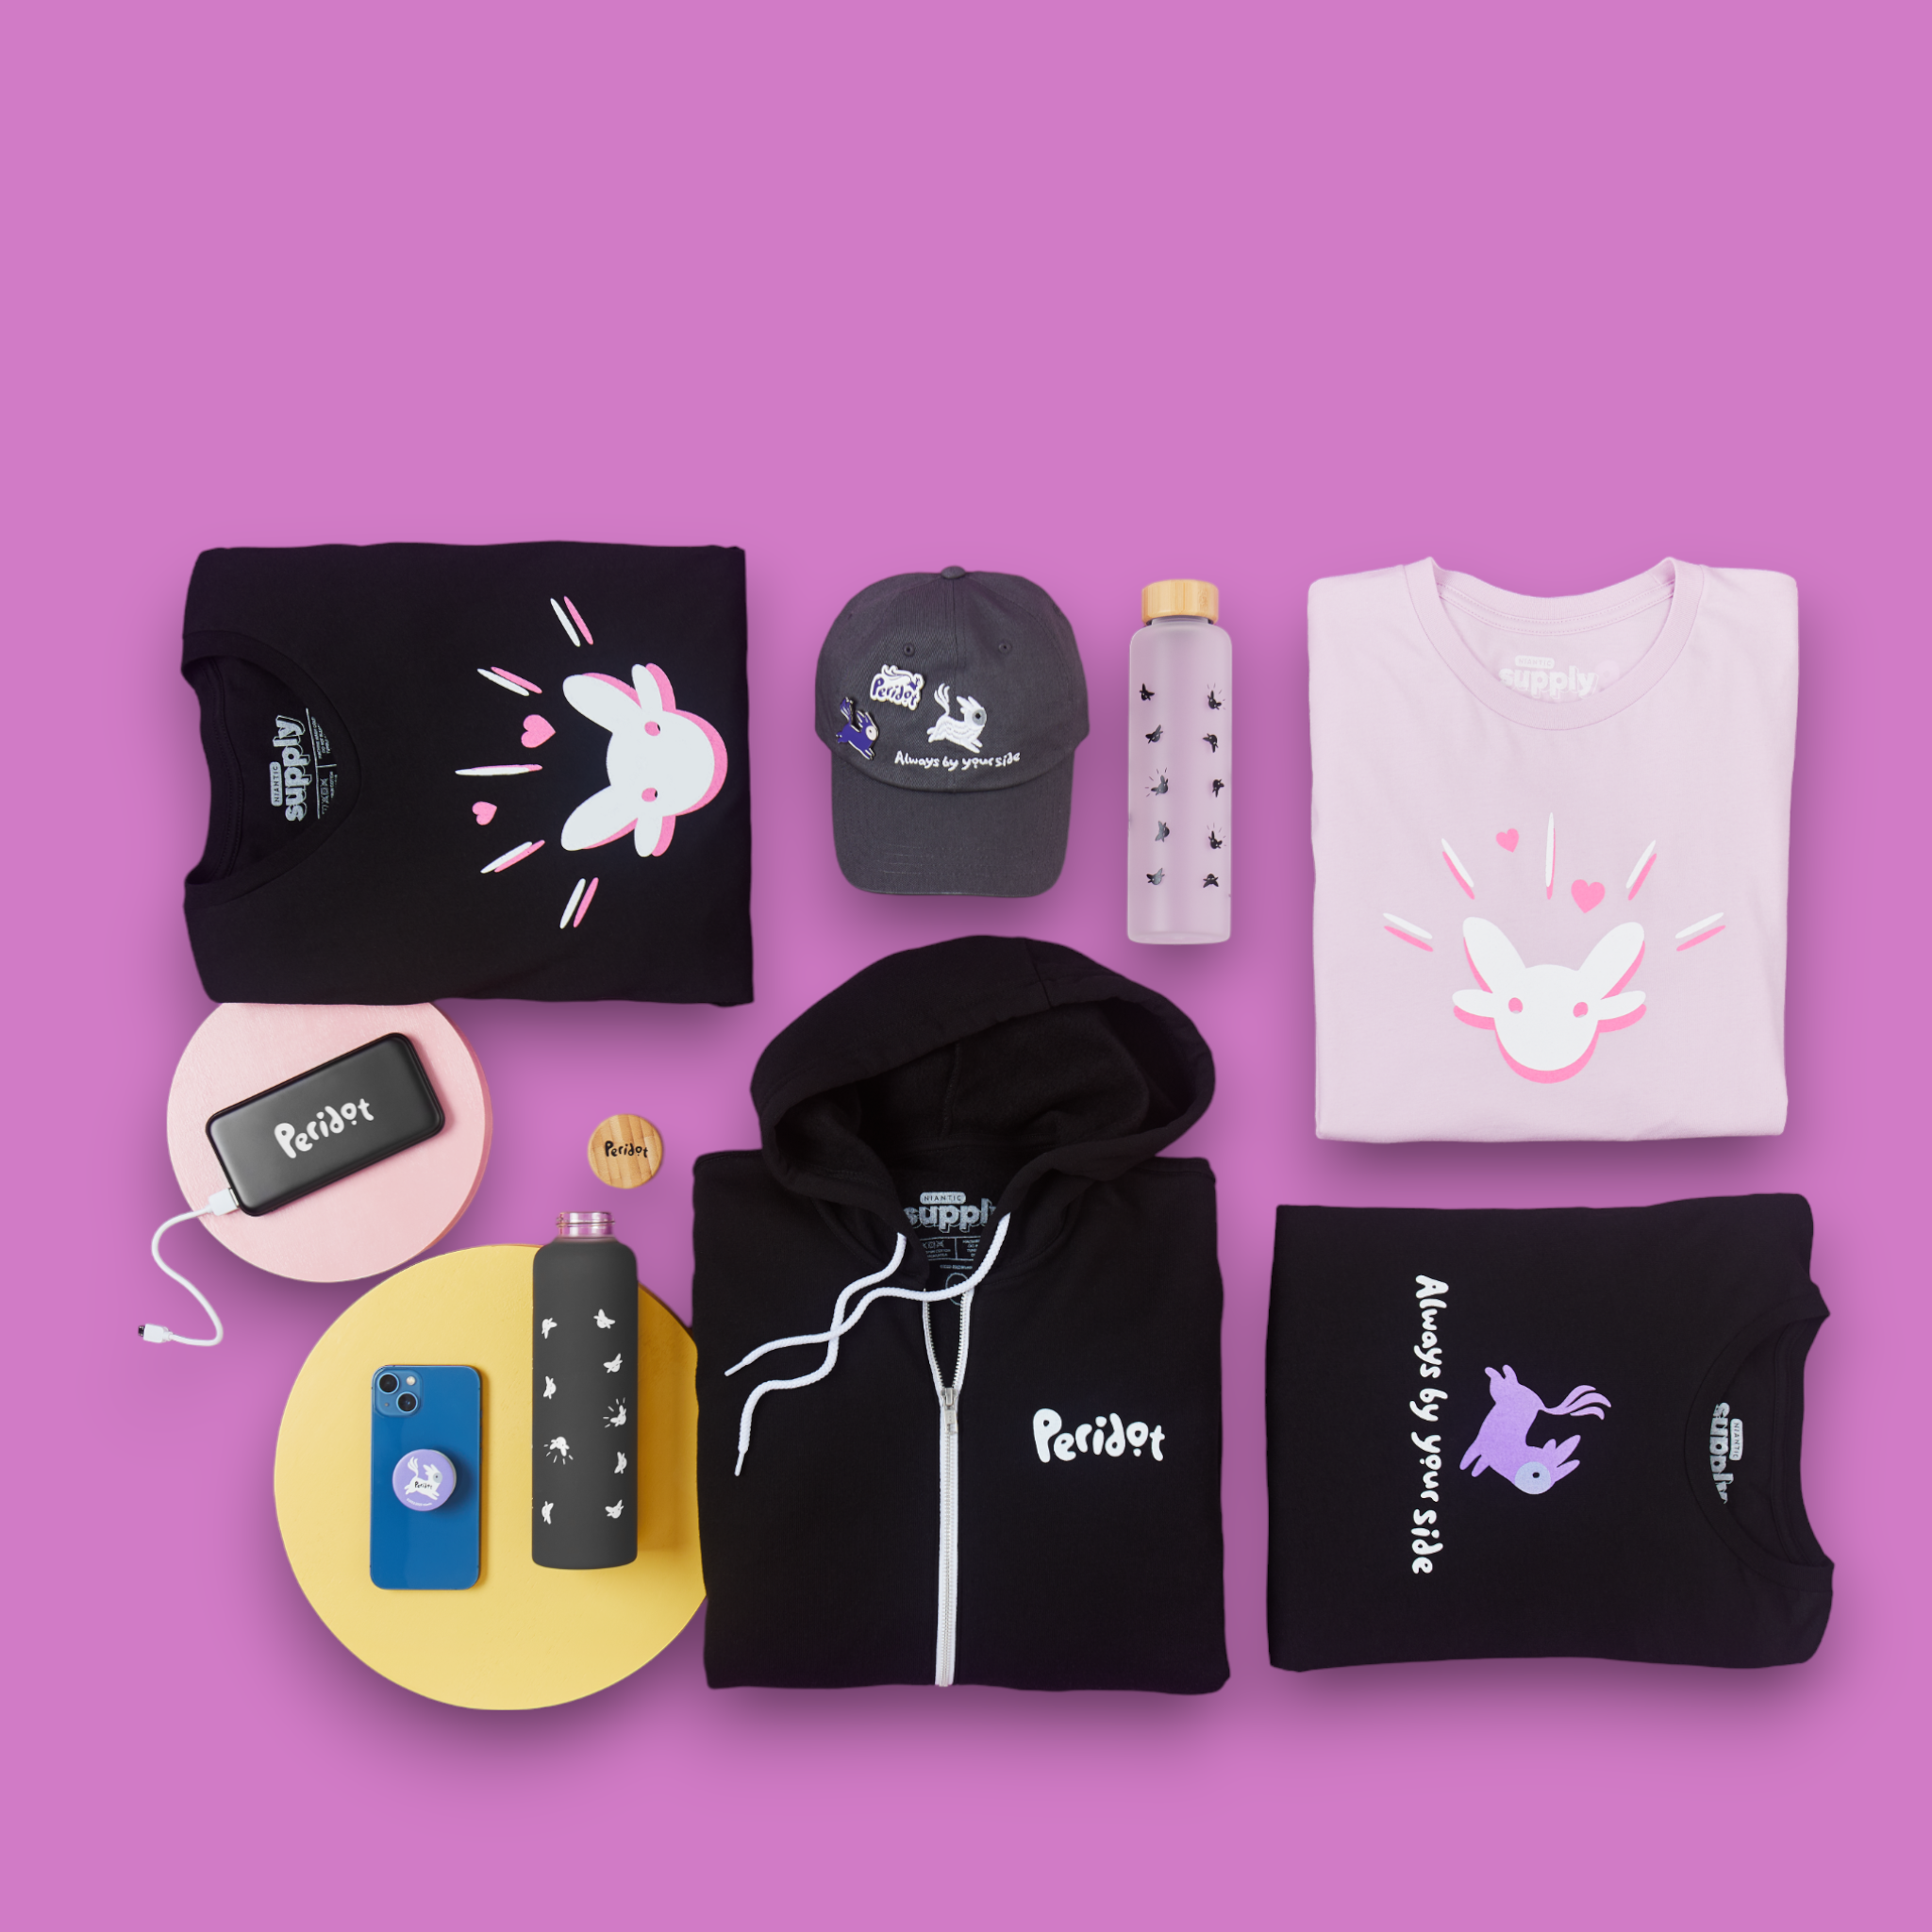 Henlo #PokémonGo players! Are you looking to release your own merch?  T-shirts, posters, stickers, hoodies? Worry no more ☺️ Valiant…